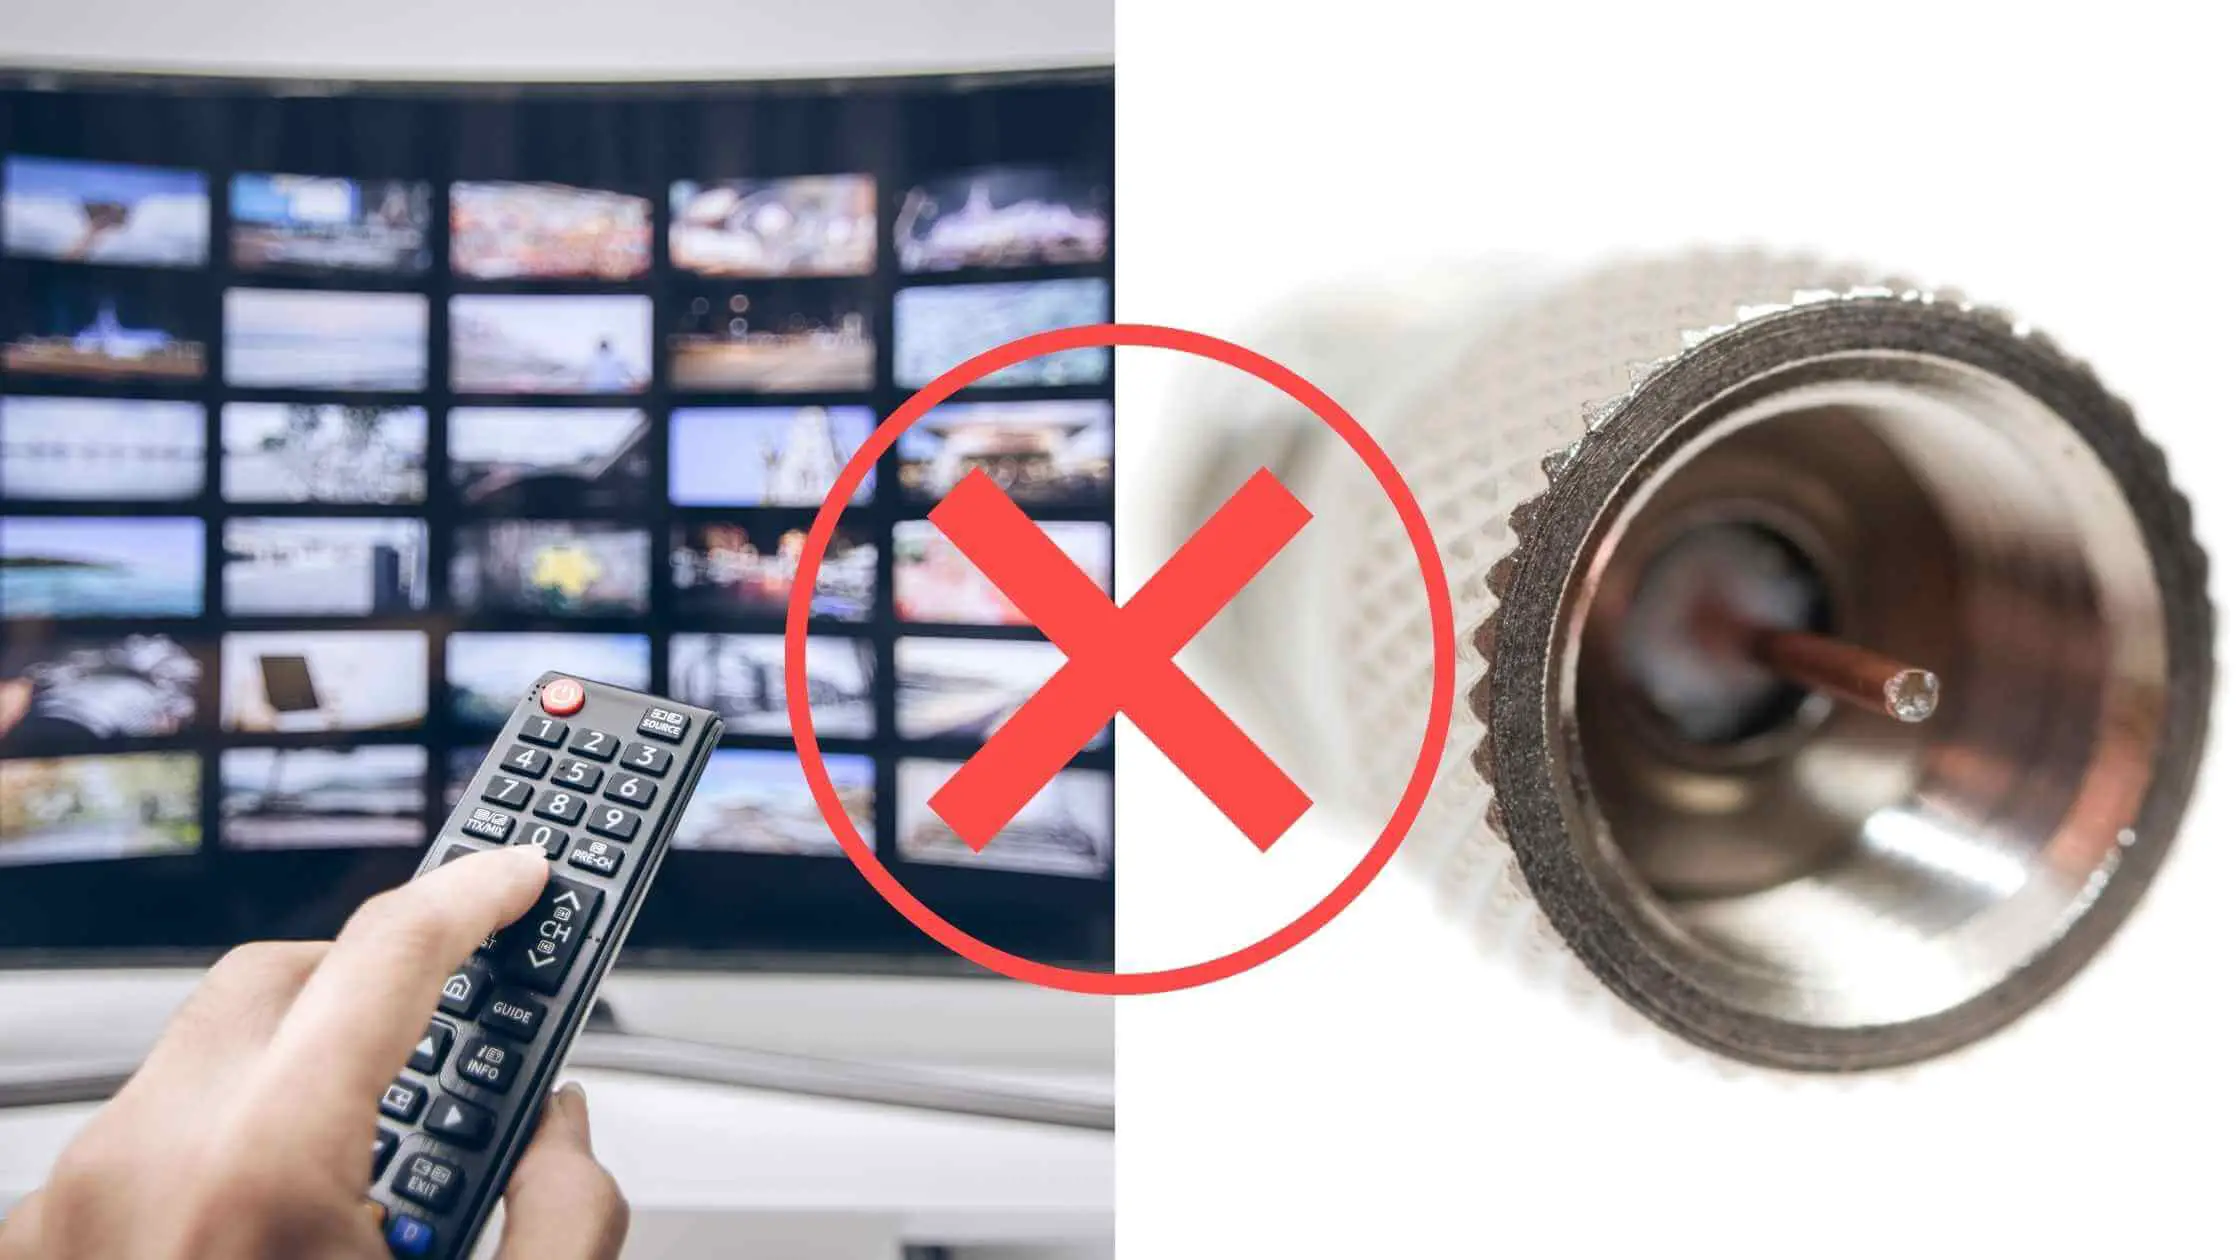 Can You Use a Smart TV Without Cable